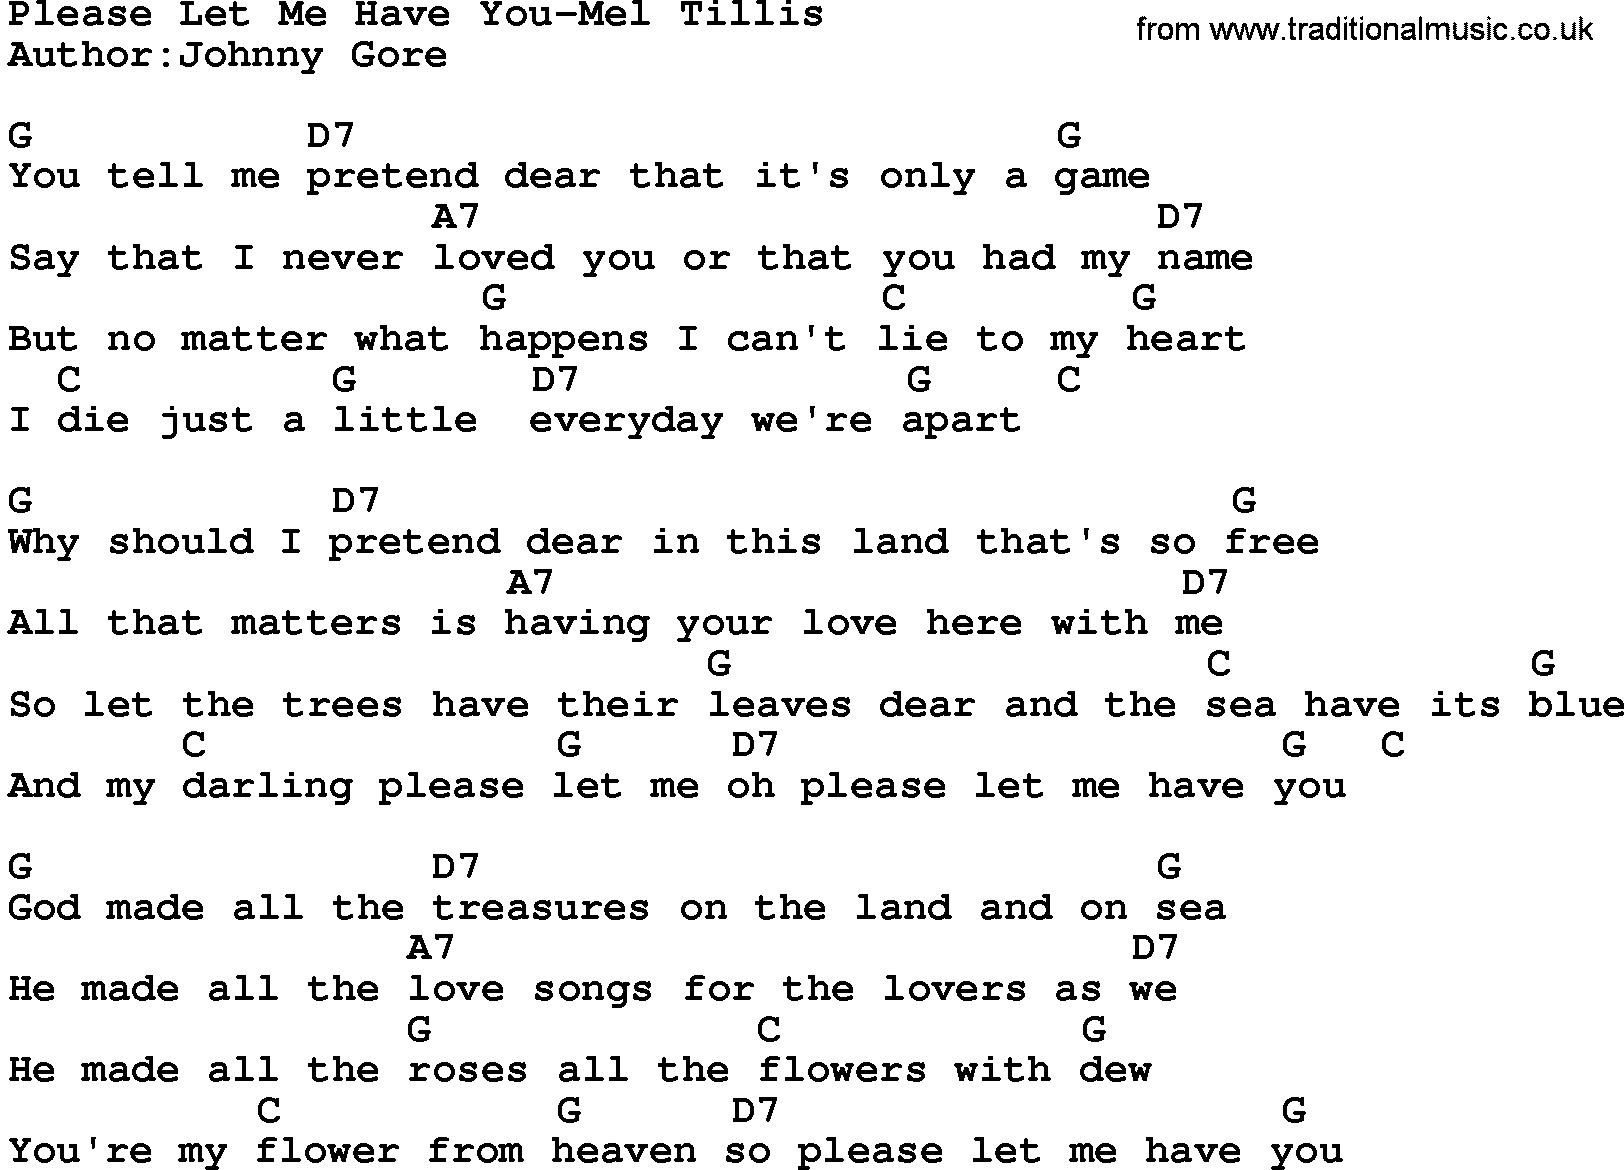 Country music song: Please Let Me Have You-Mel Tillis lyrics and chords